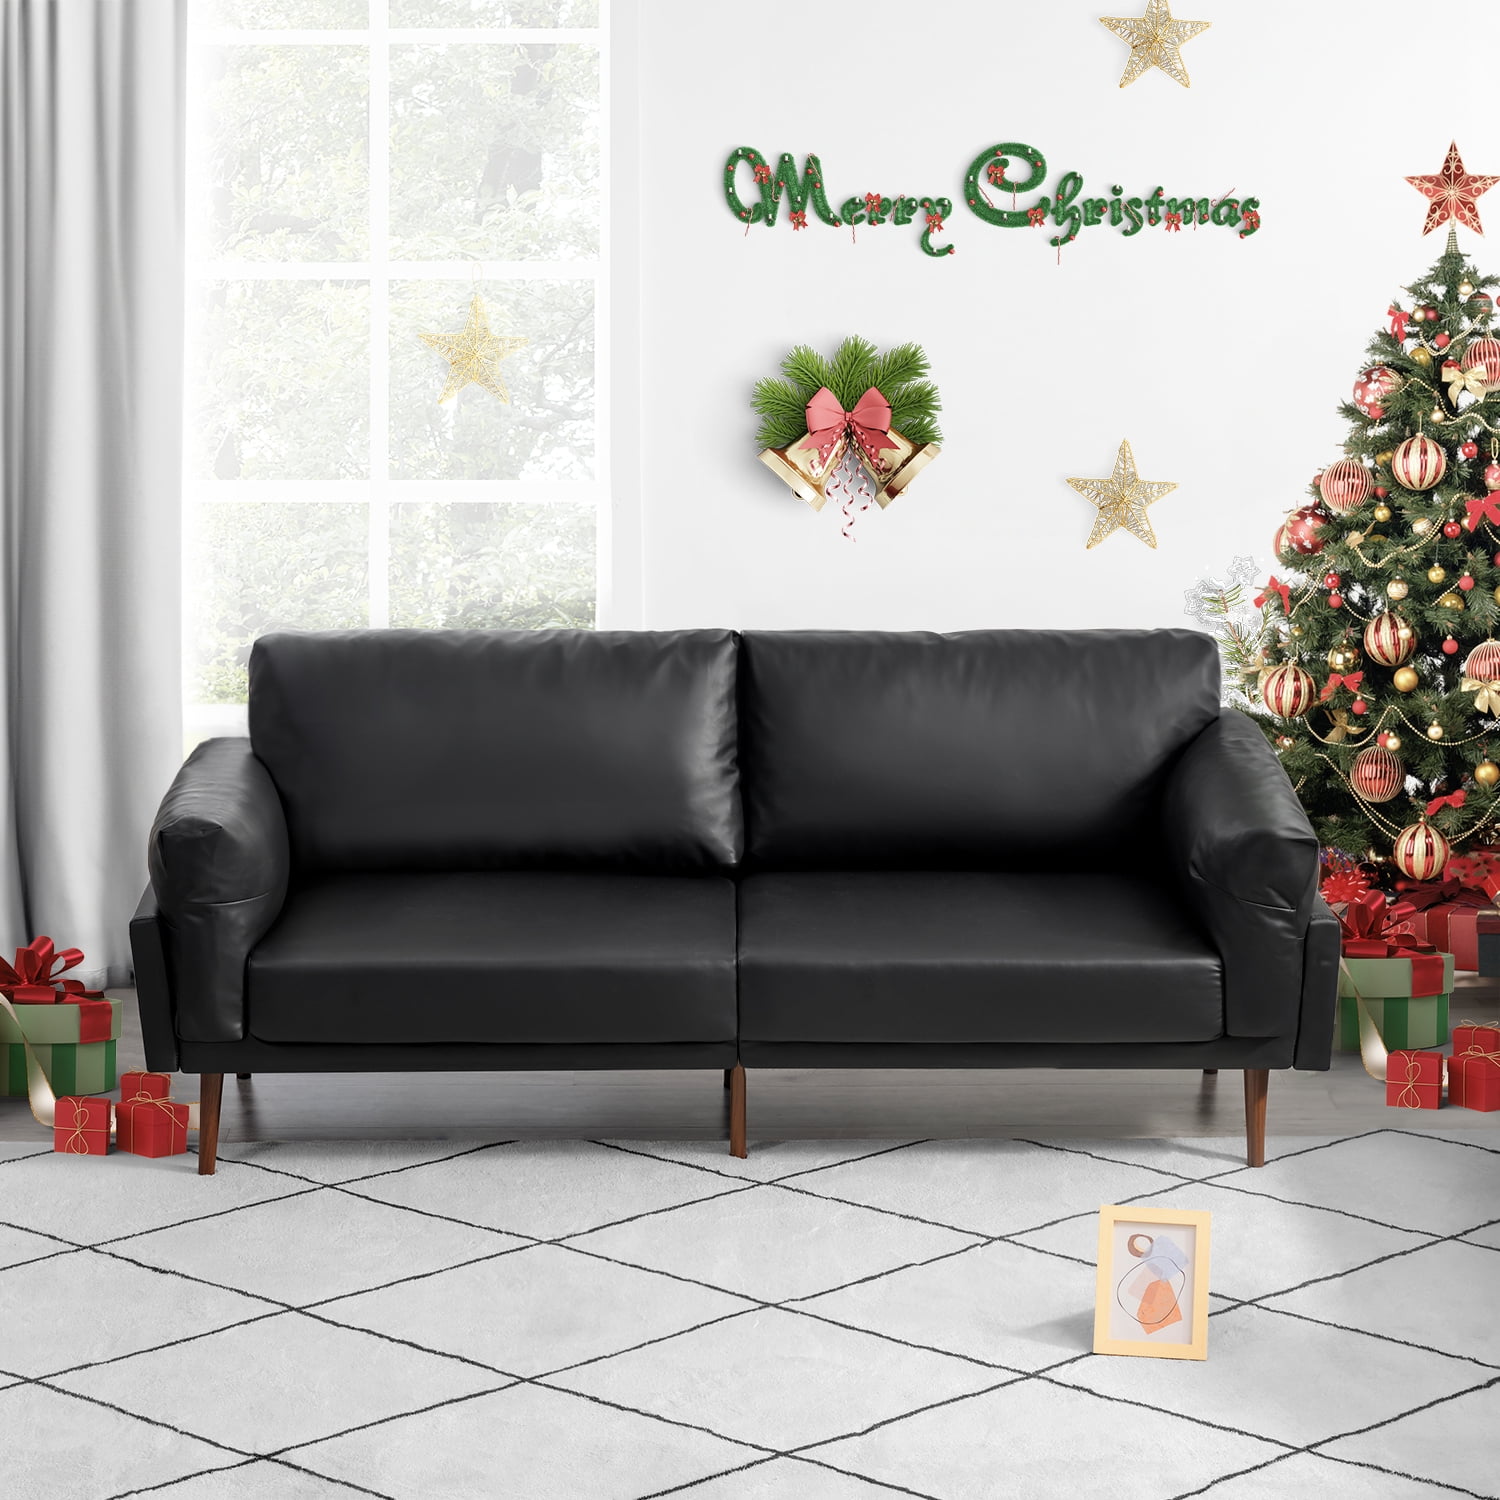 Living Room with Black Leather Sofas  Christmas decorations living room,  Leather sofa living room, Black leather sofas